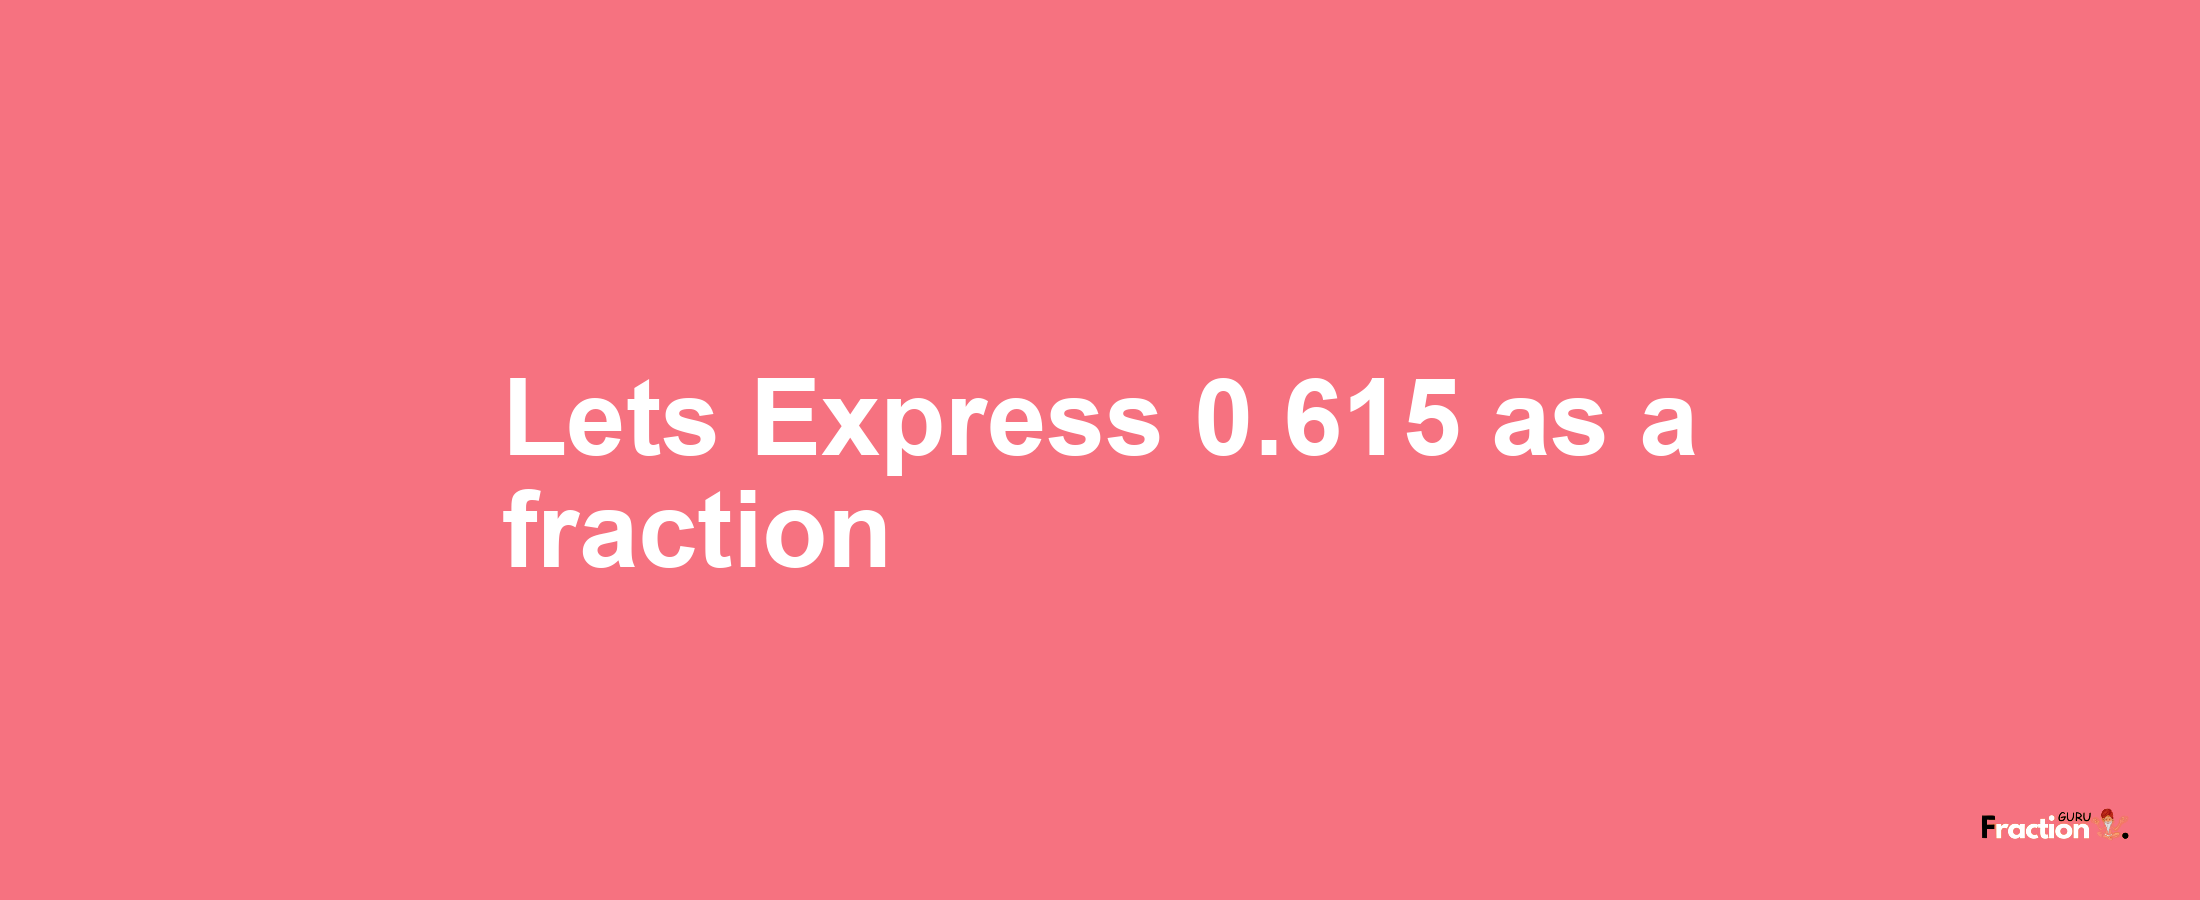 Lets Express 0.615 as afraction